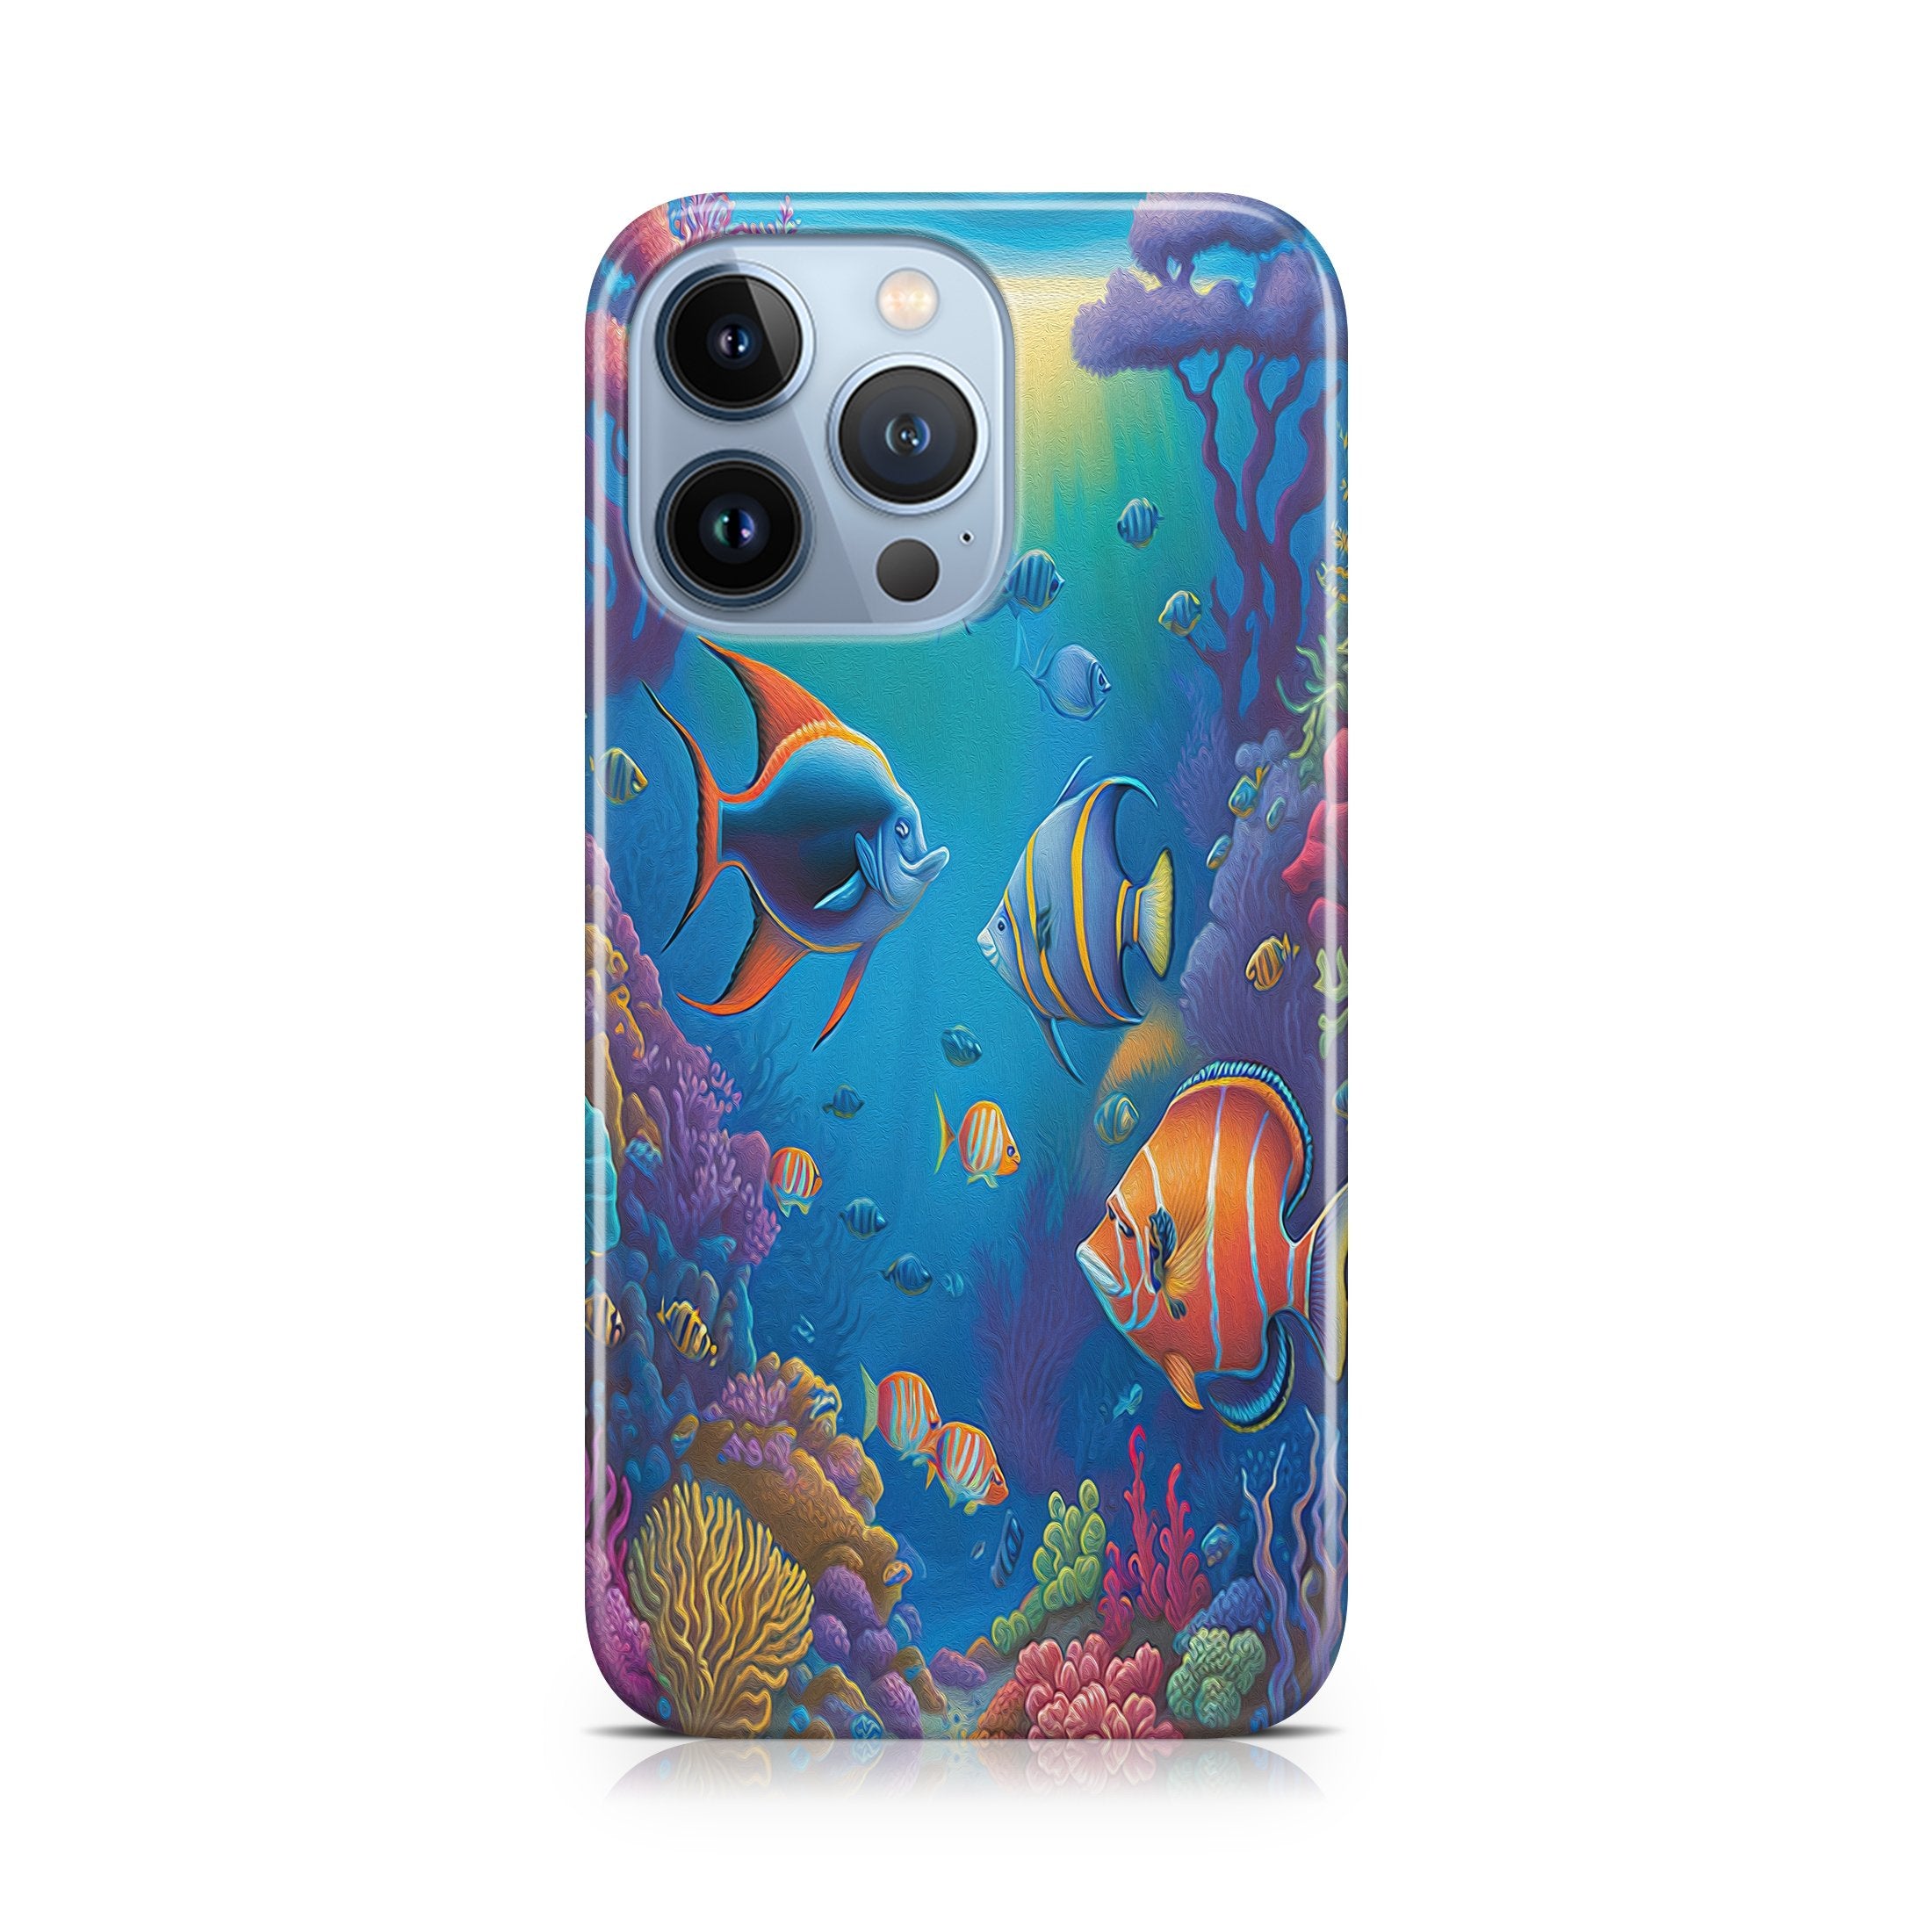 Heavenly Coral - iPhone phone case designs by CaseSwagger